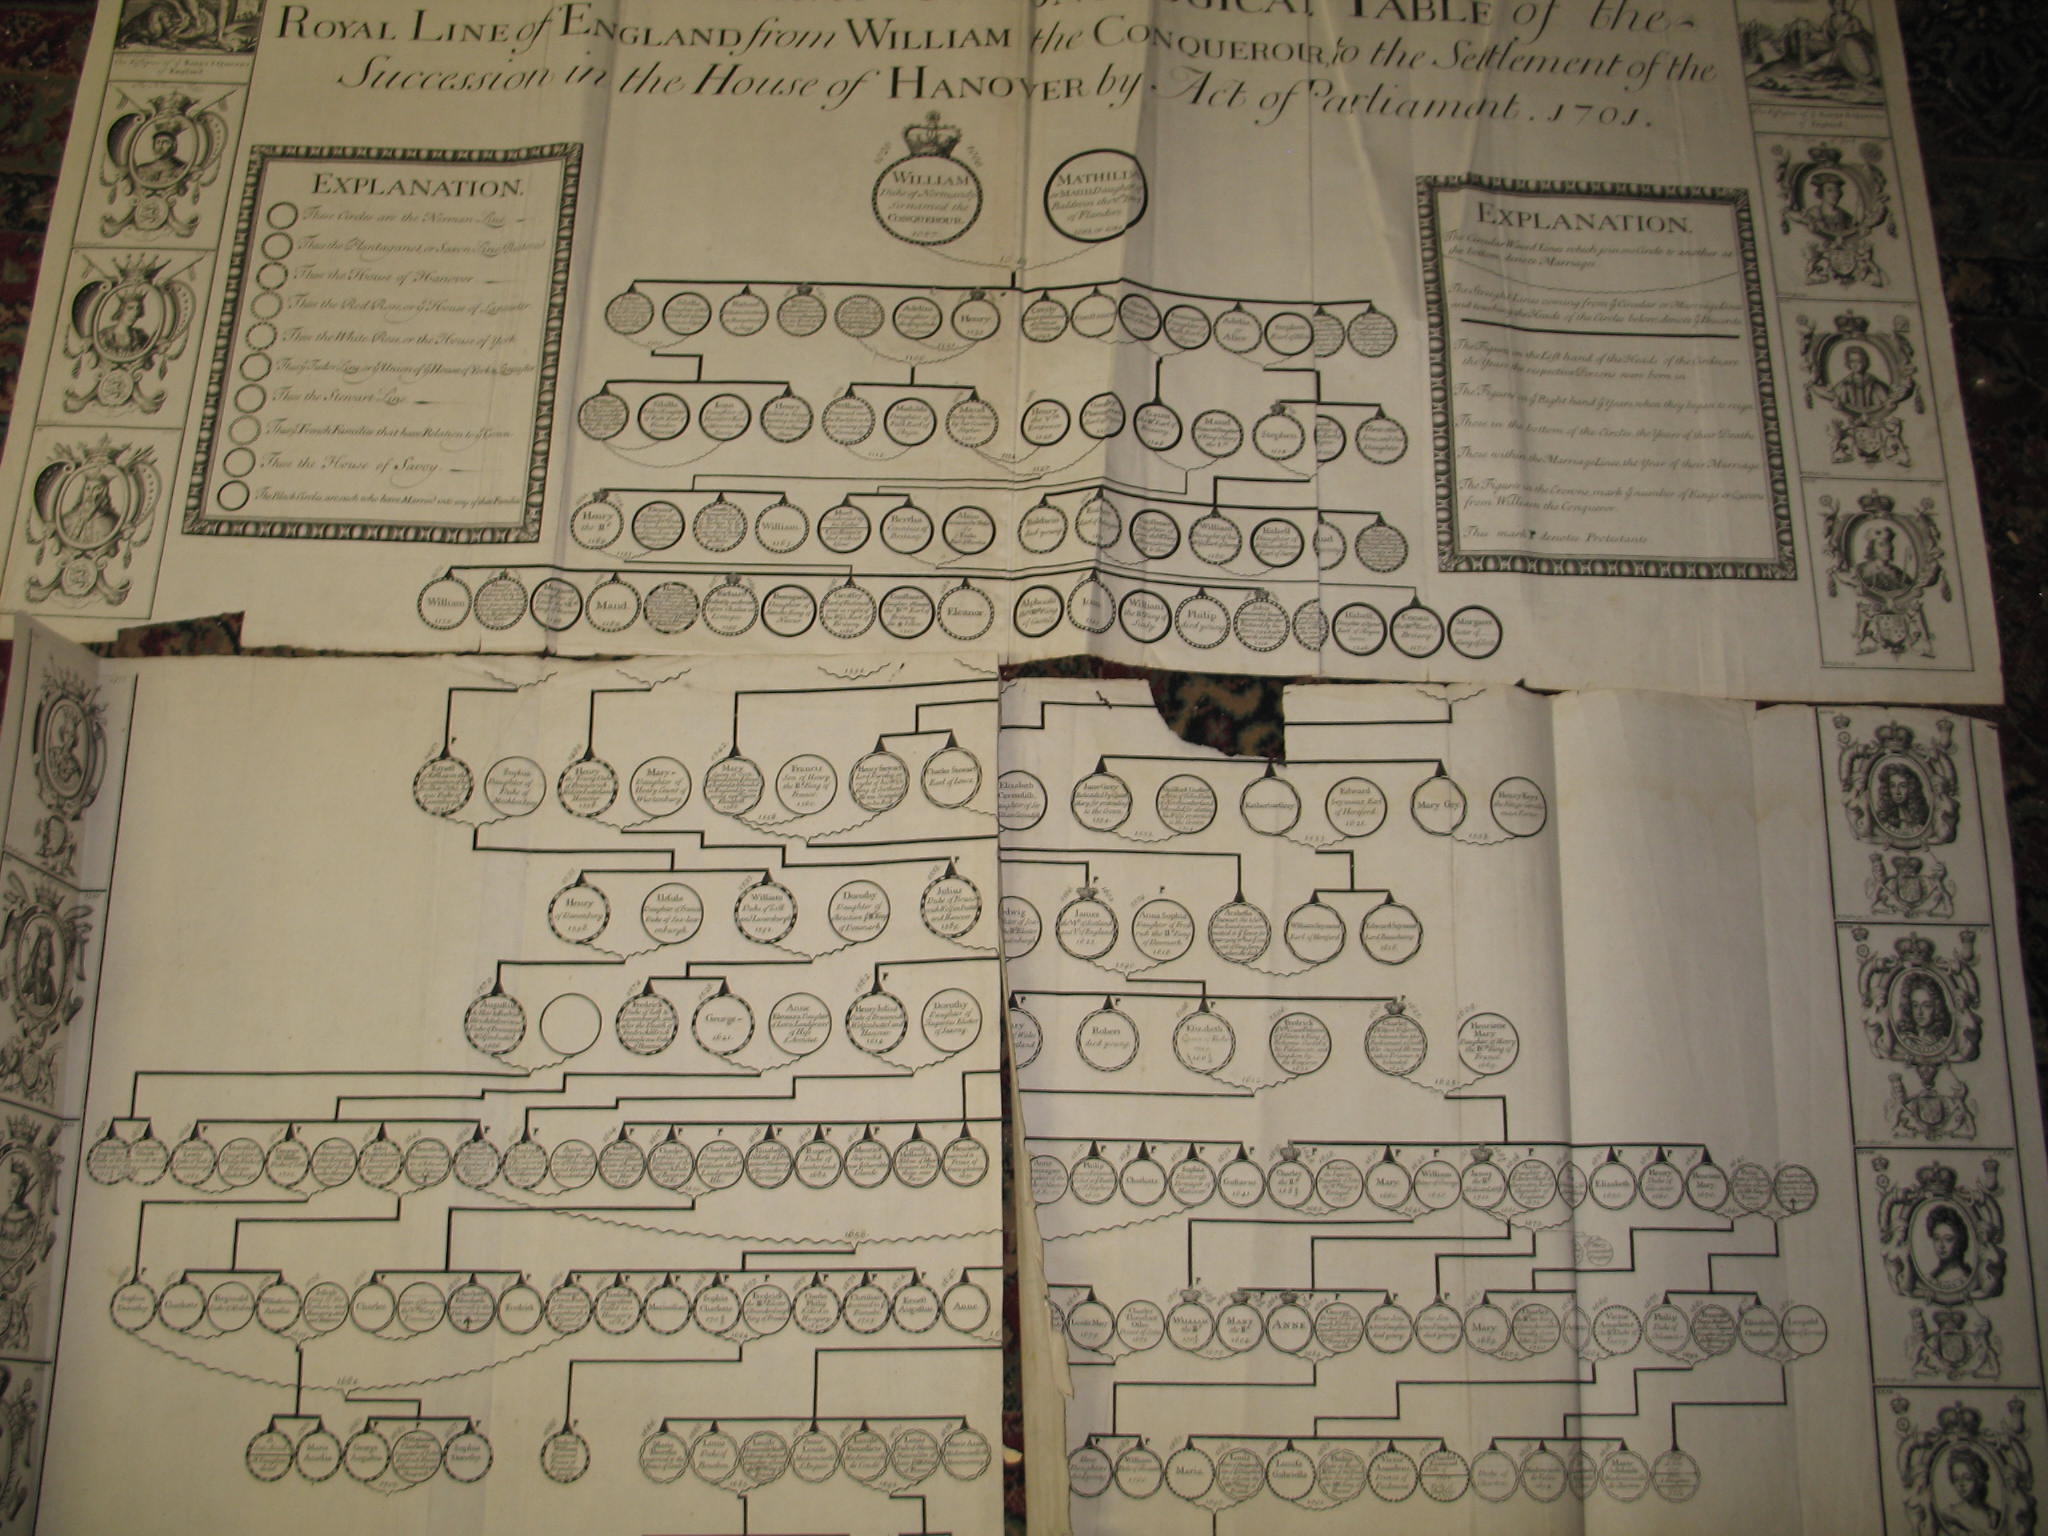 NUTTING (J.) Genealogical...Table of the Royal Lion of England, engraving, 2 of 3 sheets, 20 x 45